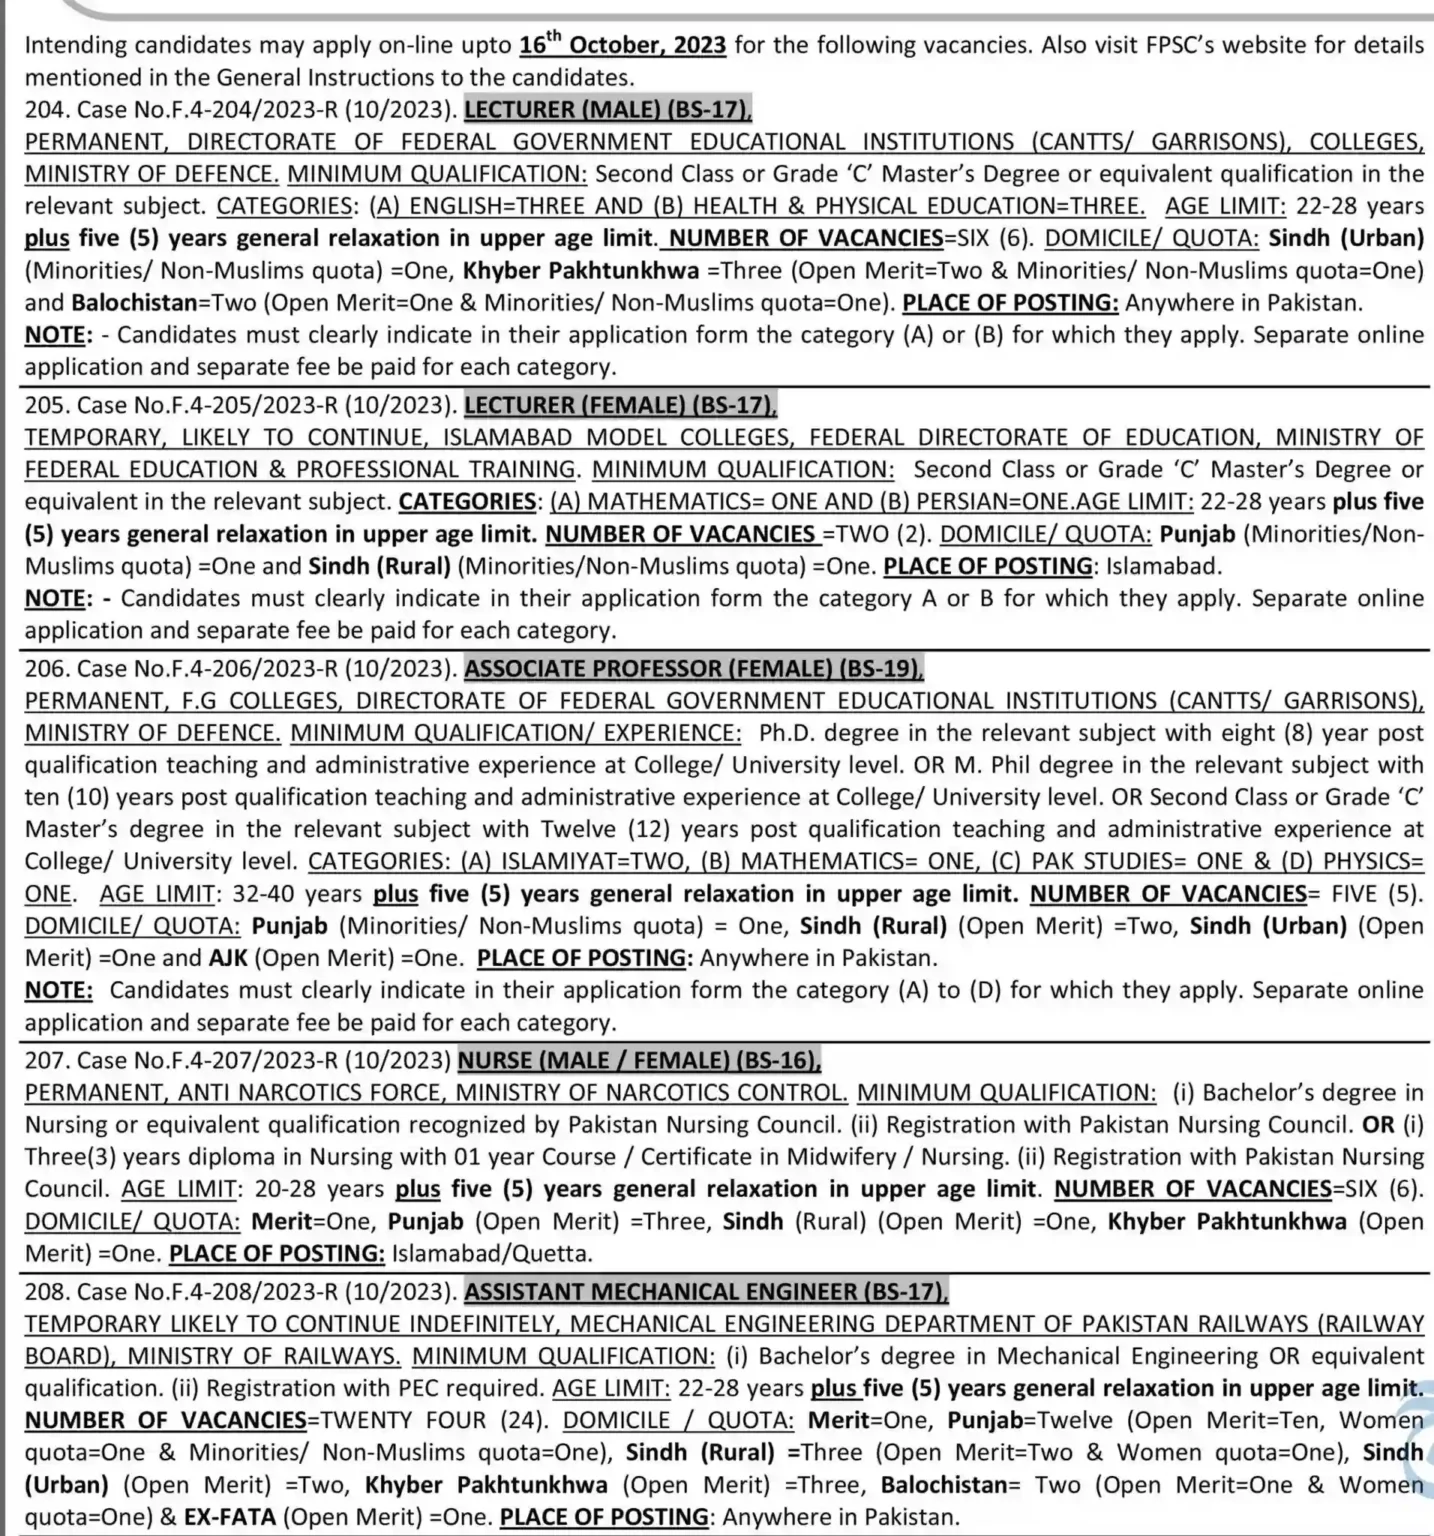 FPSC Jobs 2023 - Join the Federal Public Service Commission of Pakistan